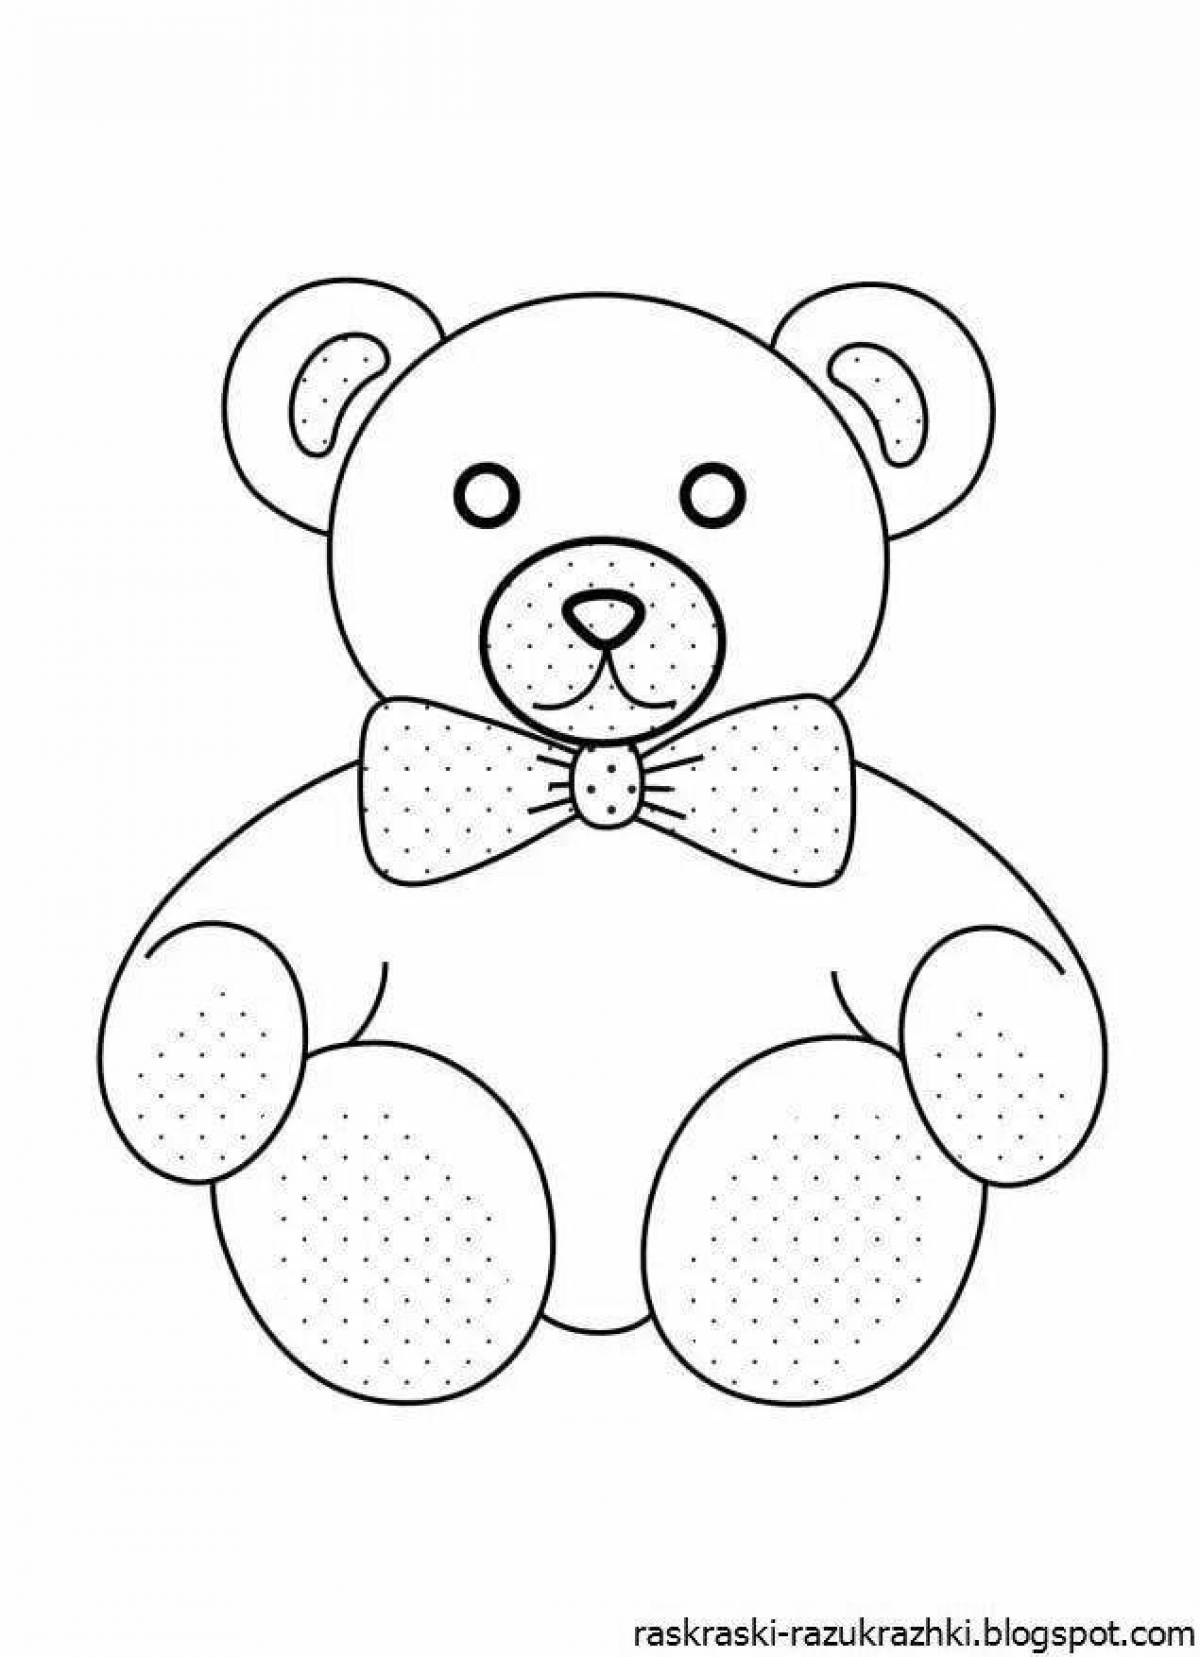 Puzzled teddy bear coloring page for kids